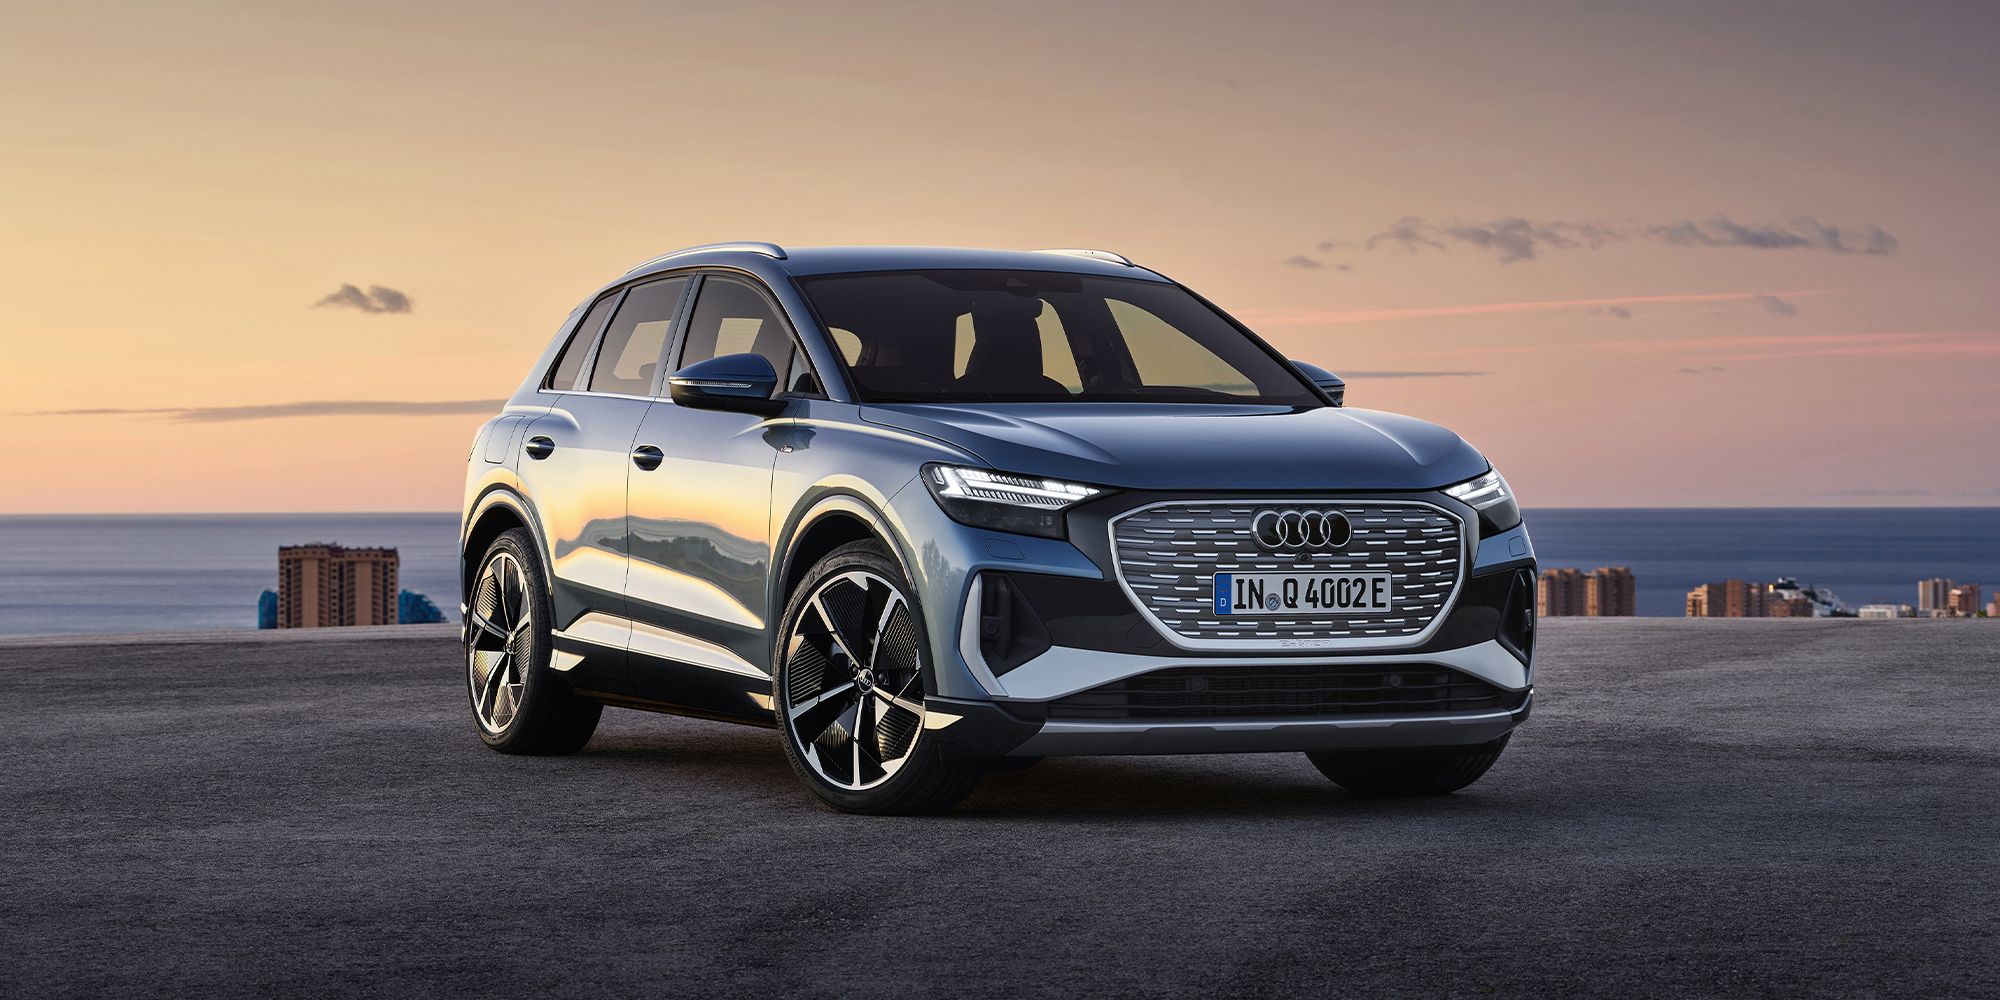 The front of the new Q4 e-tron